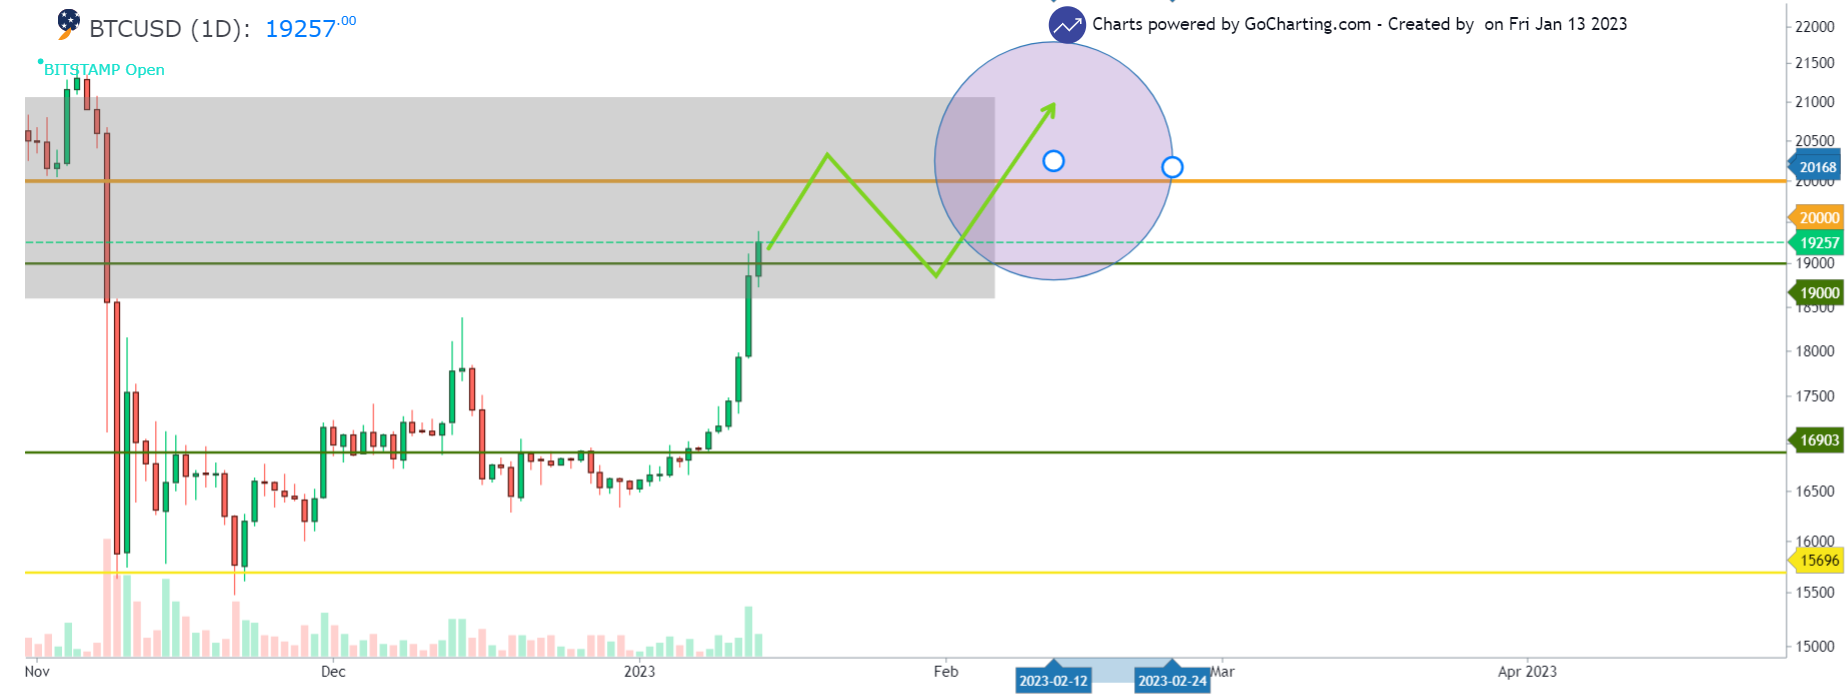 BTC/USD 1-day chart showing the buy zone of Bitcoin